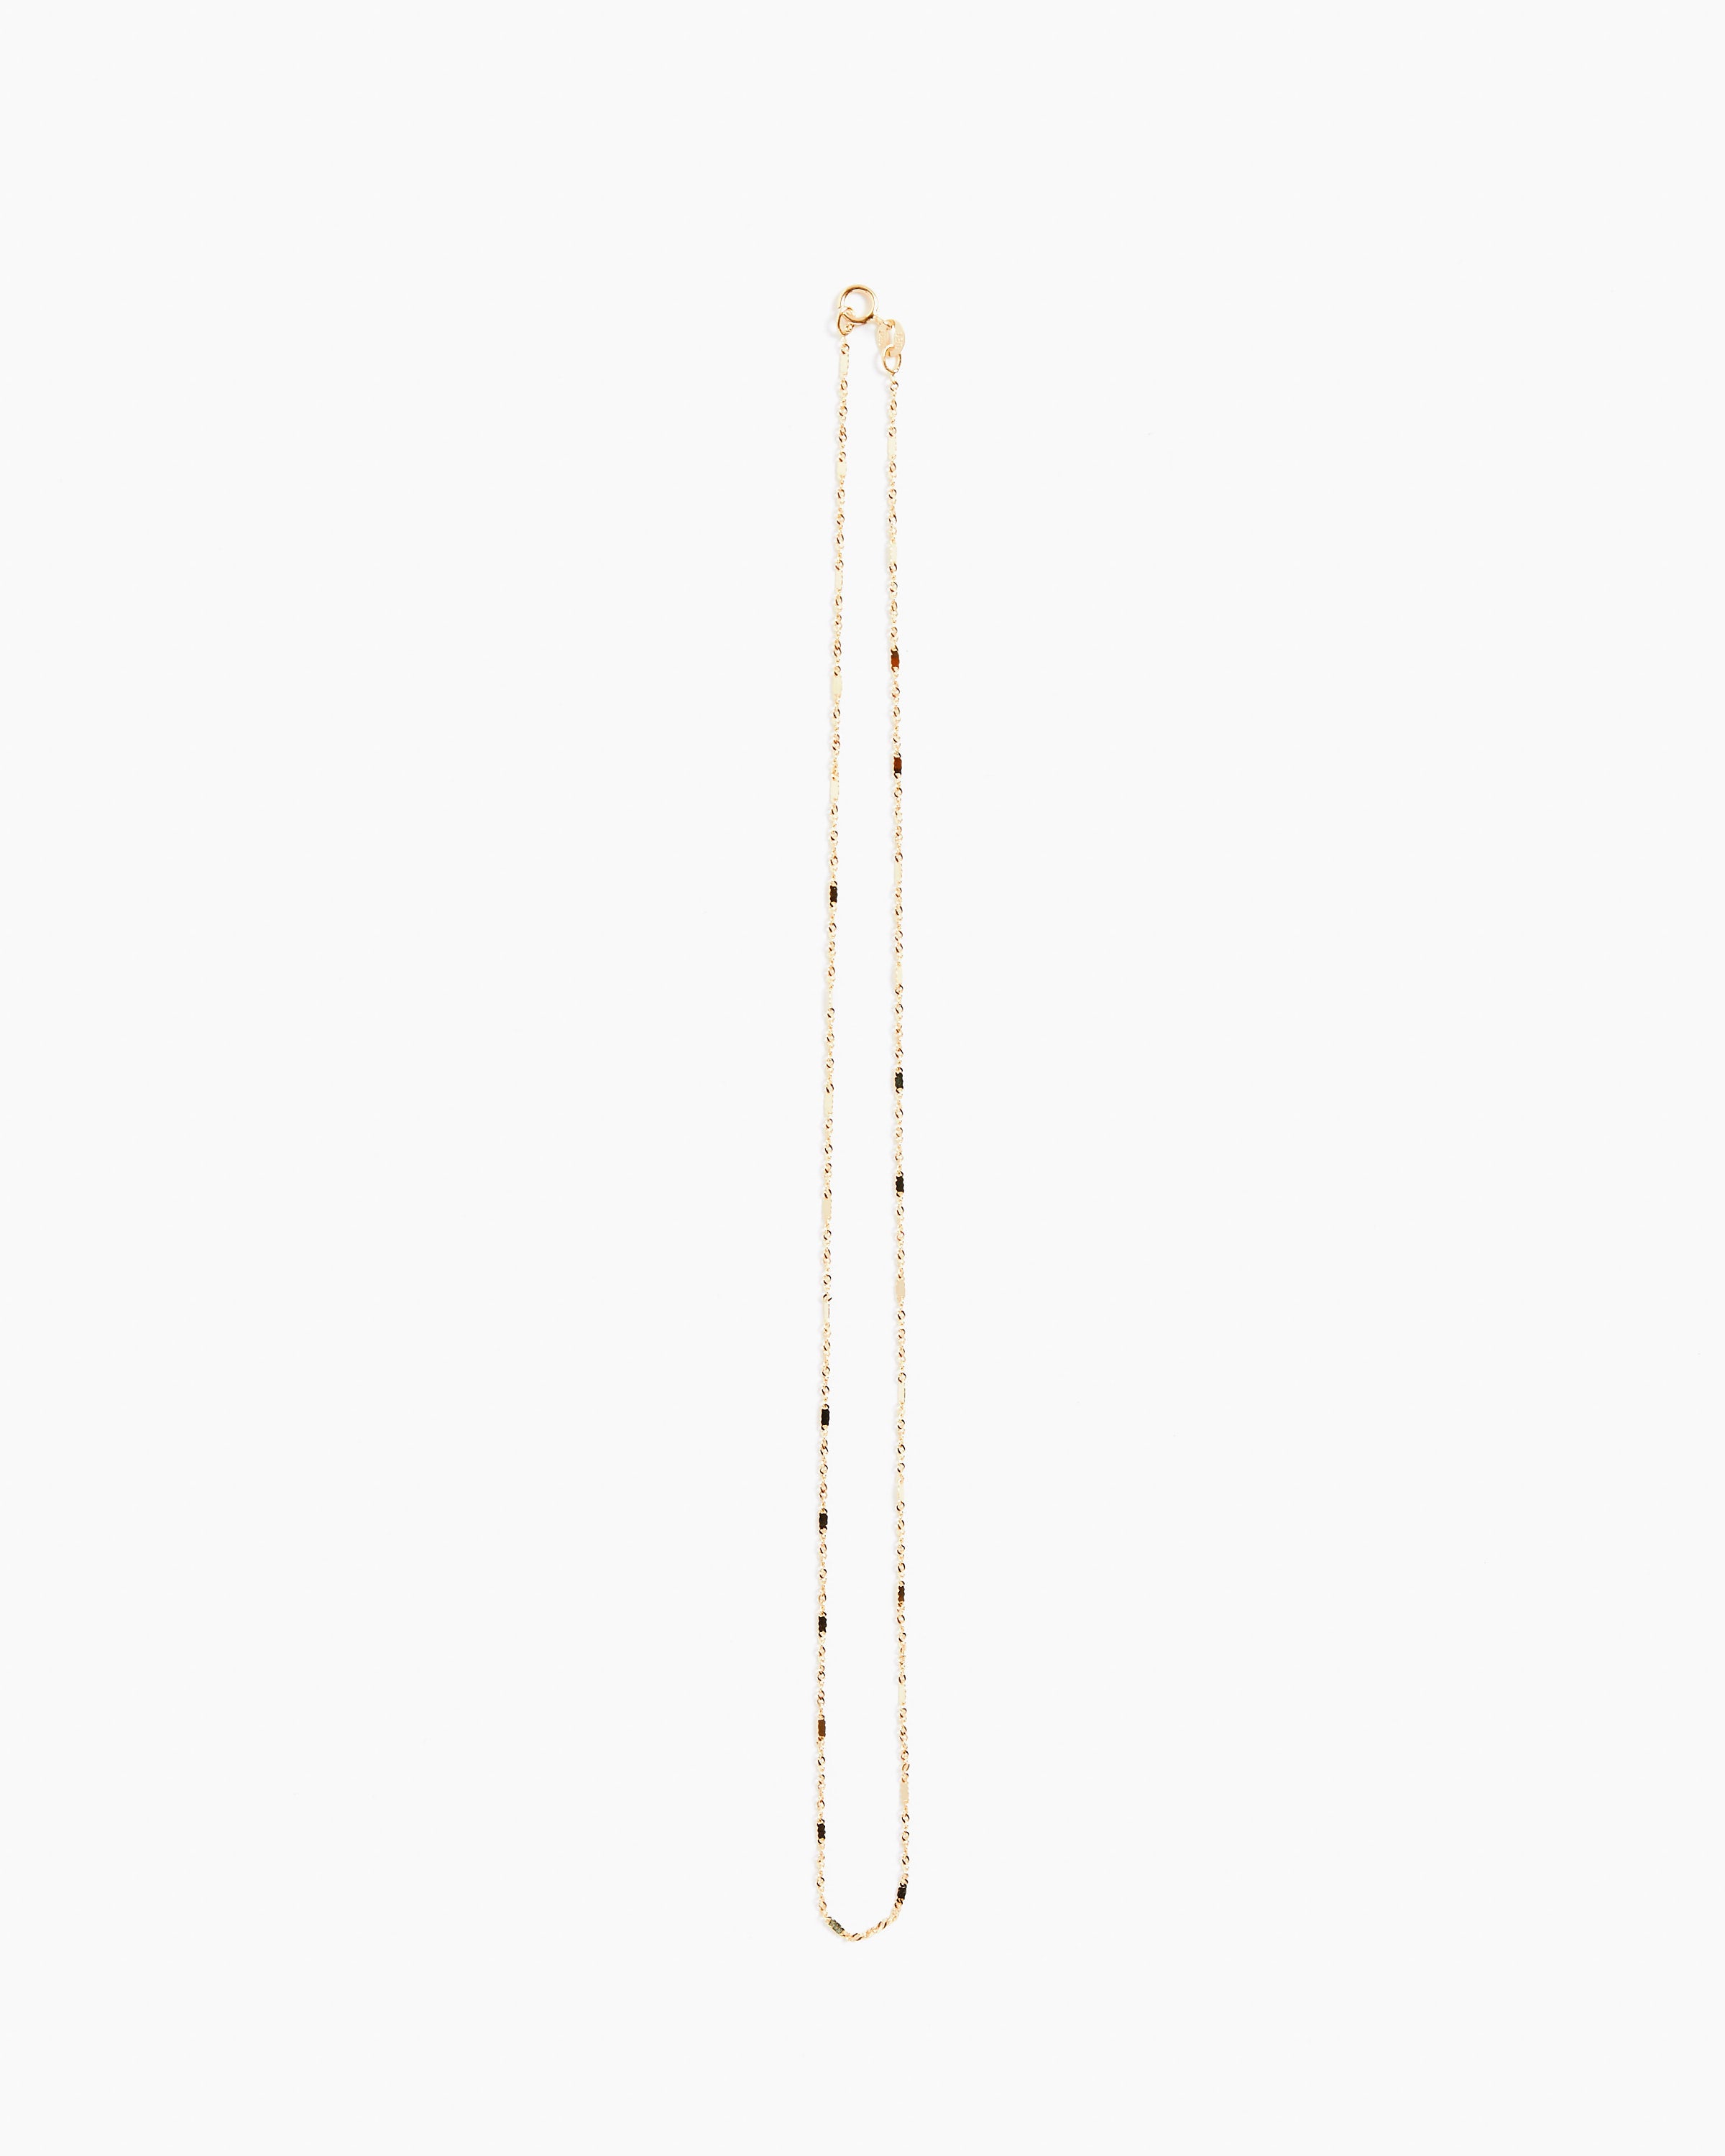 Glitter Link Chain in 14k Yellow Gold